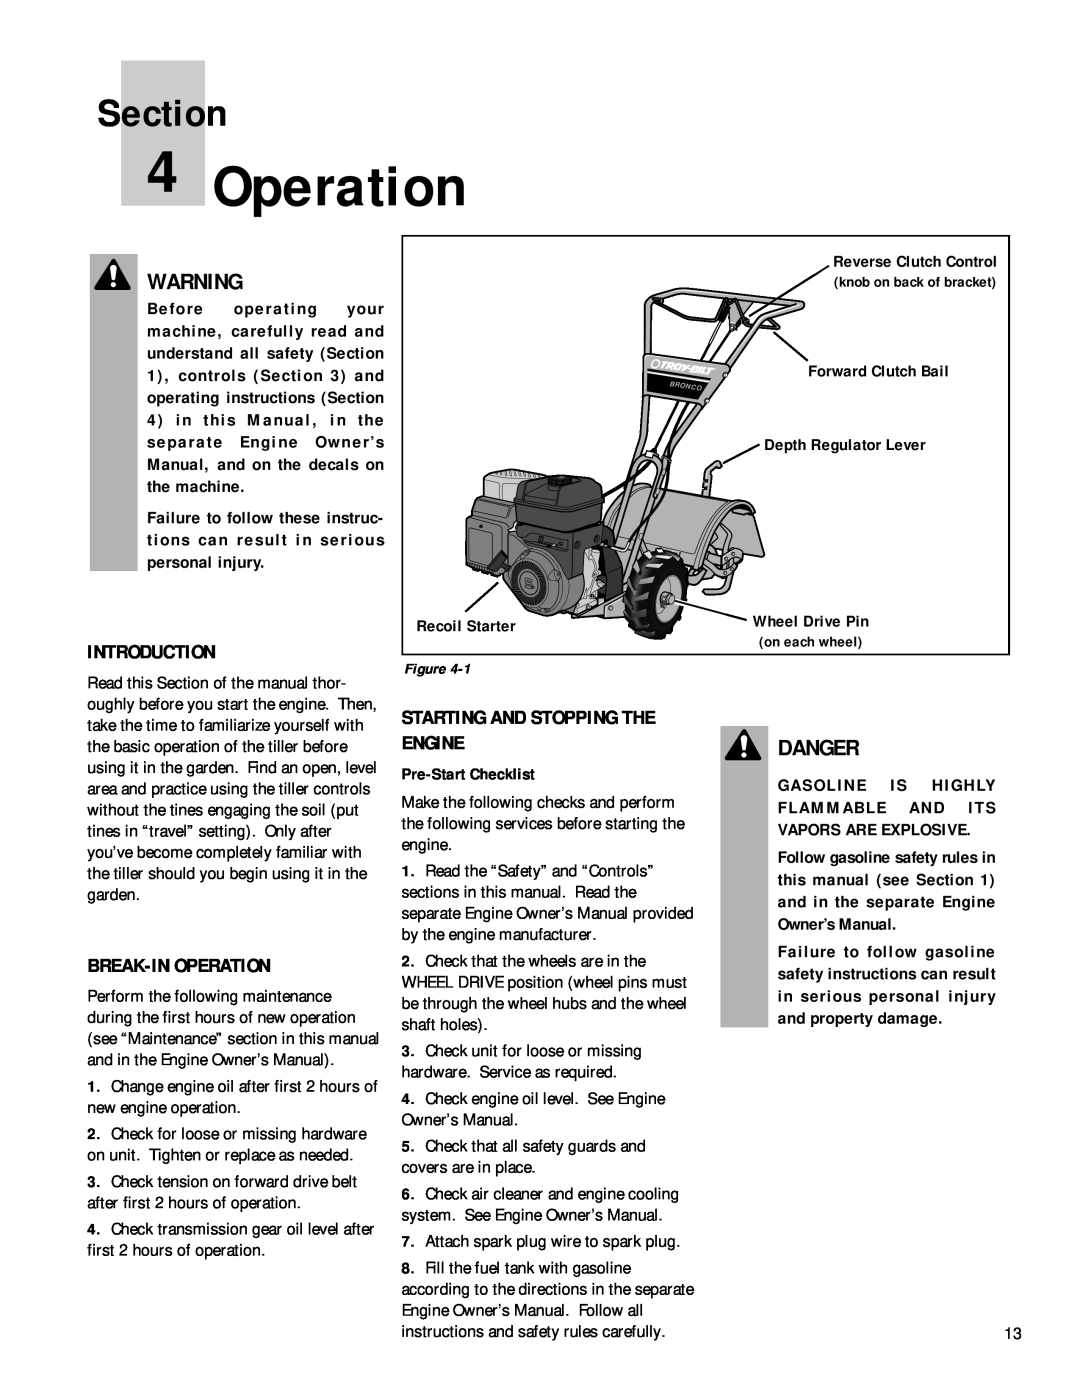 Bolens 12180 Danger, Introduction, Break-In Operation, Starting And Stopping The Engine, Section, Recoil Starter 